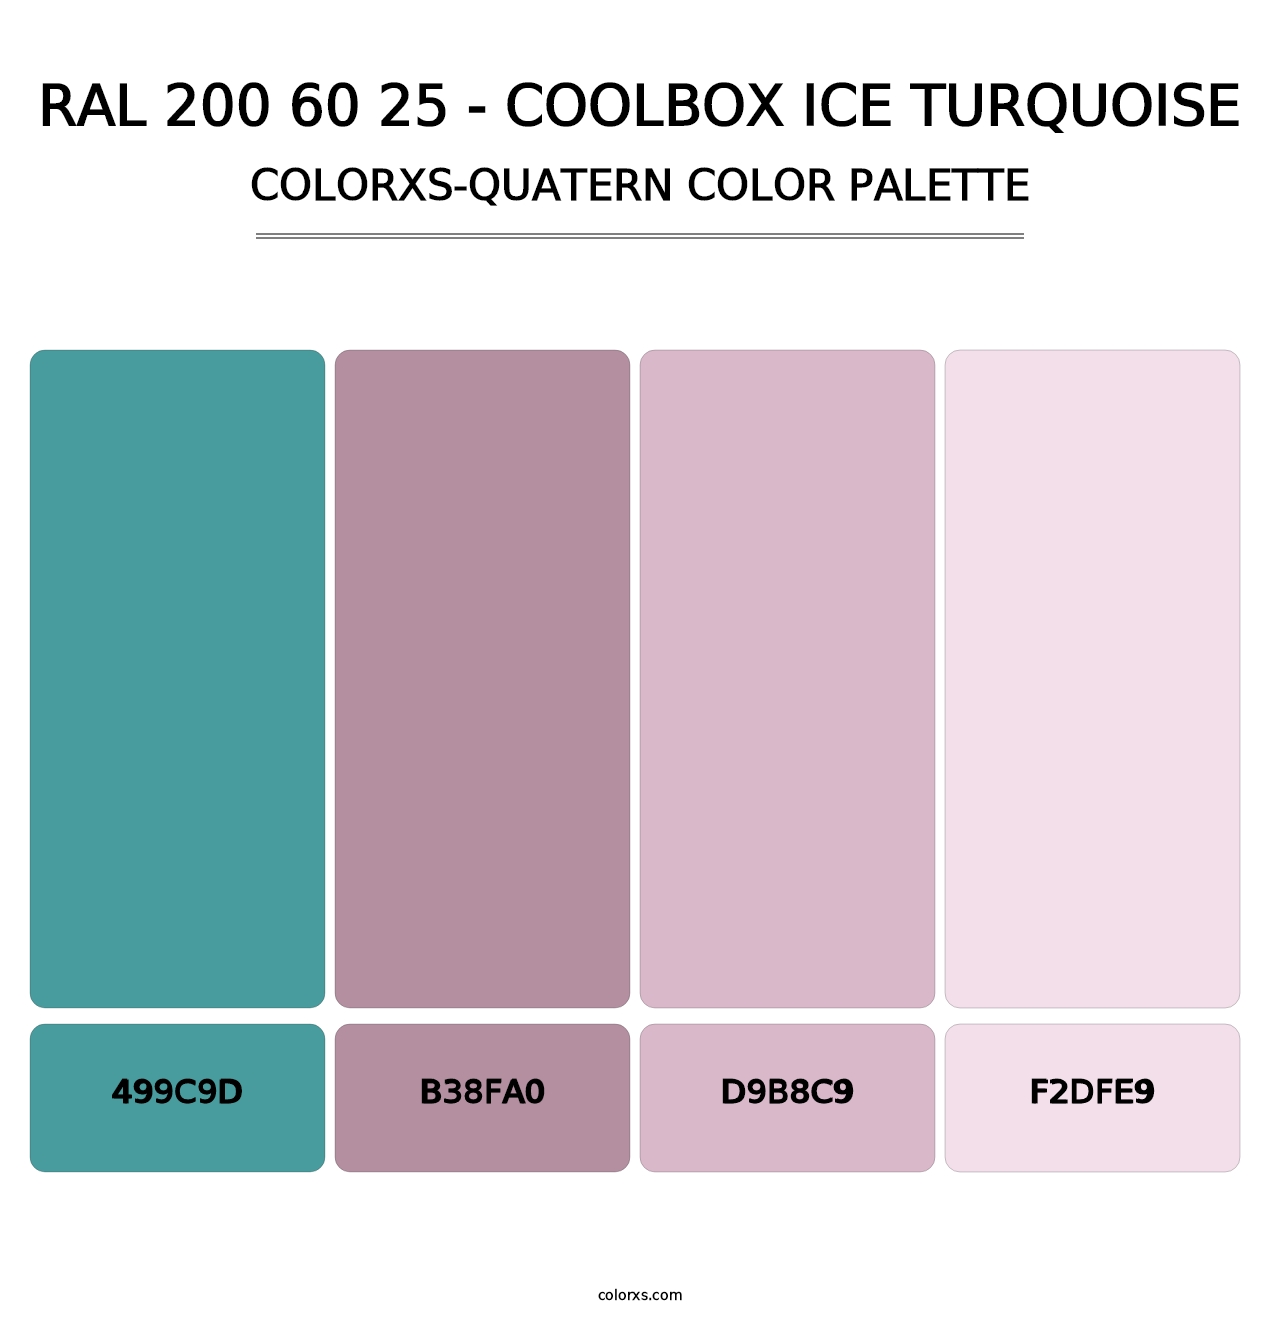 RAL 200 60 25 - Coolbox Ice Turquoise - Colorxs Quatern Palette